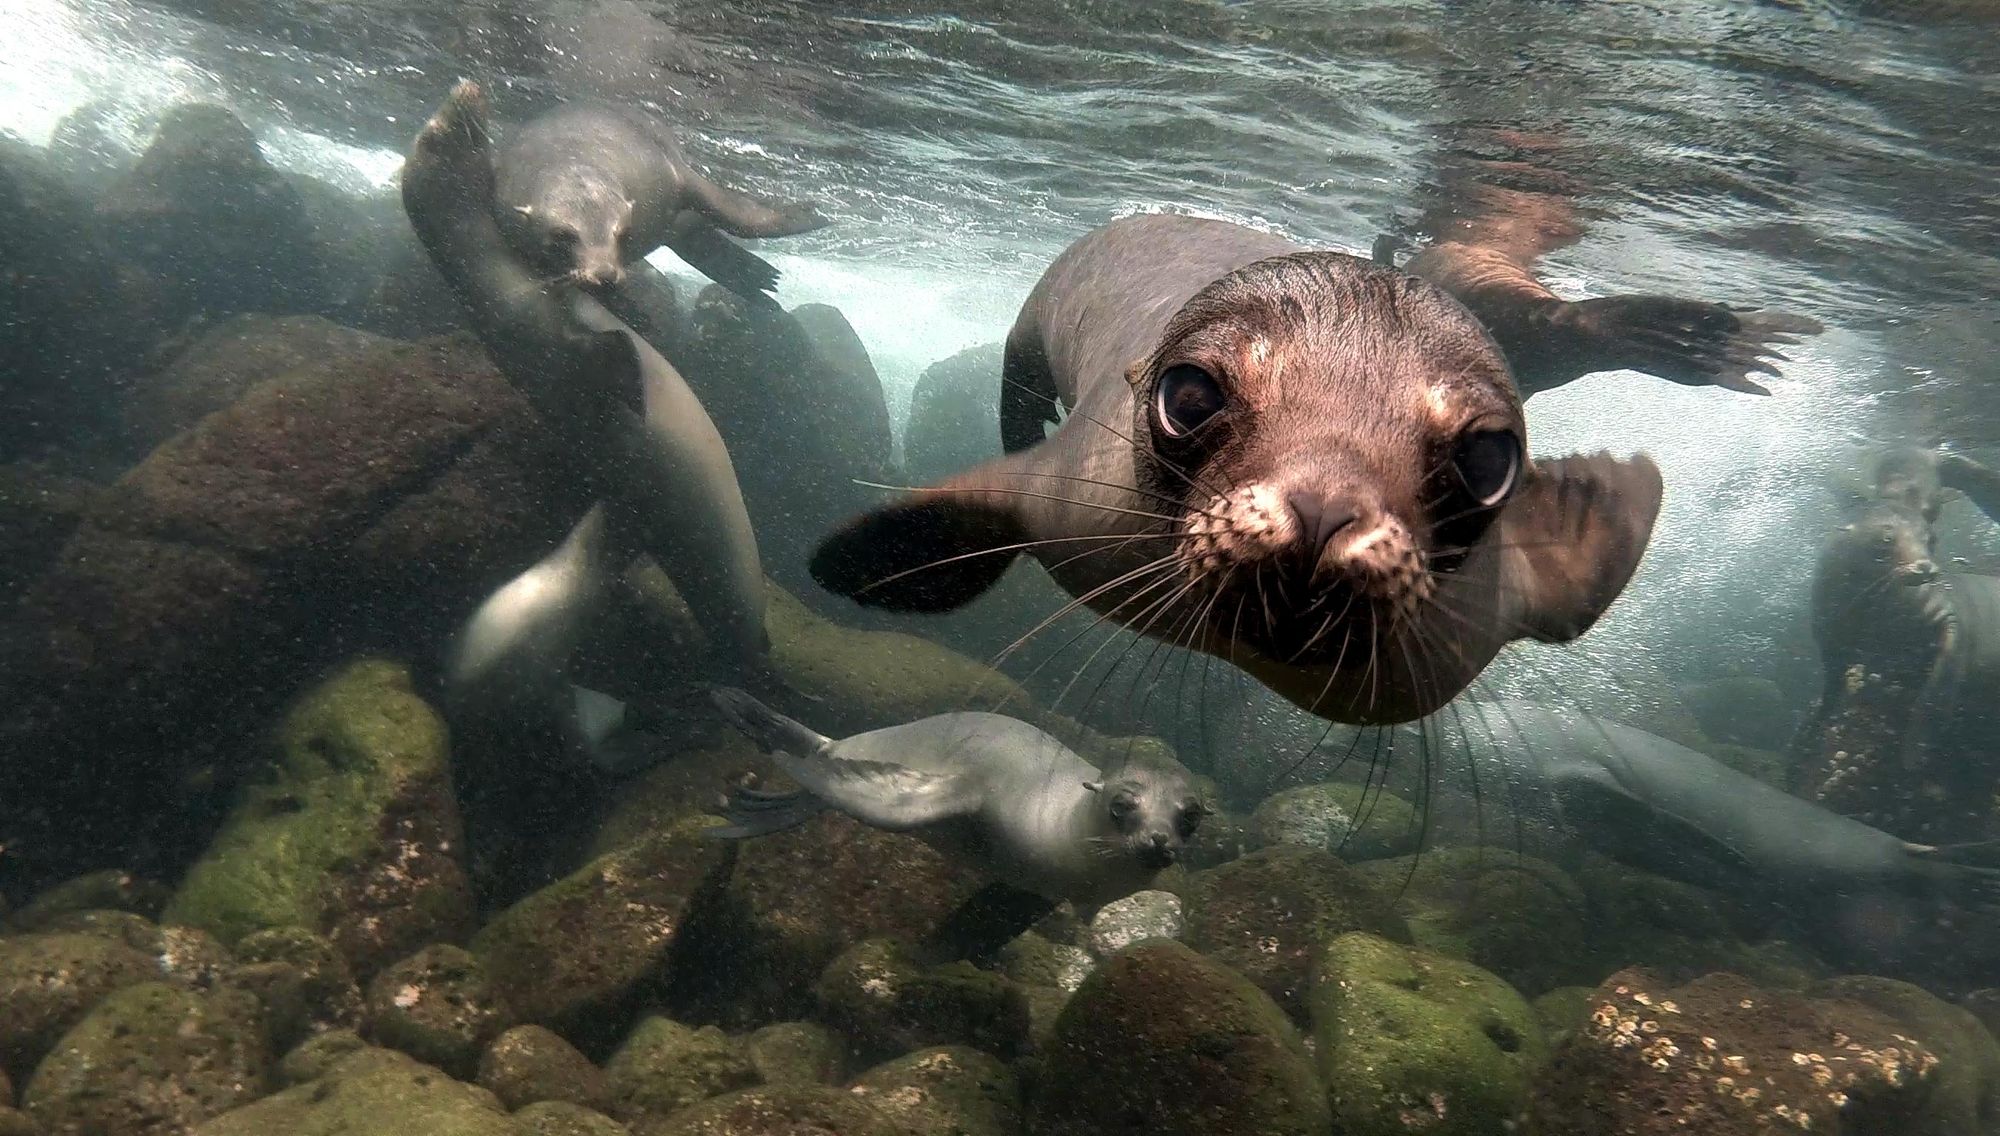 A curious sea lion gets up close to a snorkeller off Isabela Island. Photo: Getty